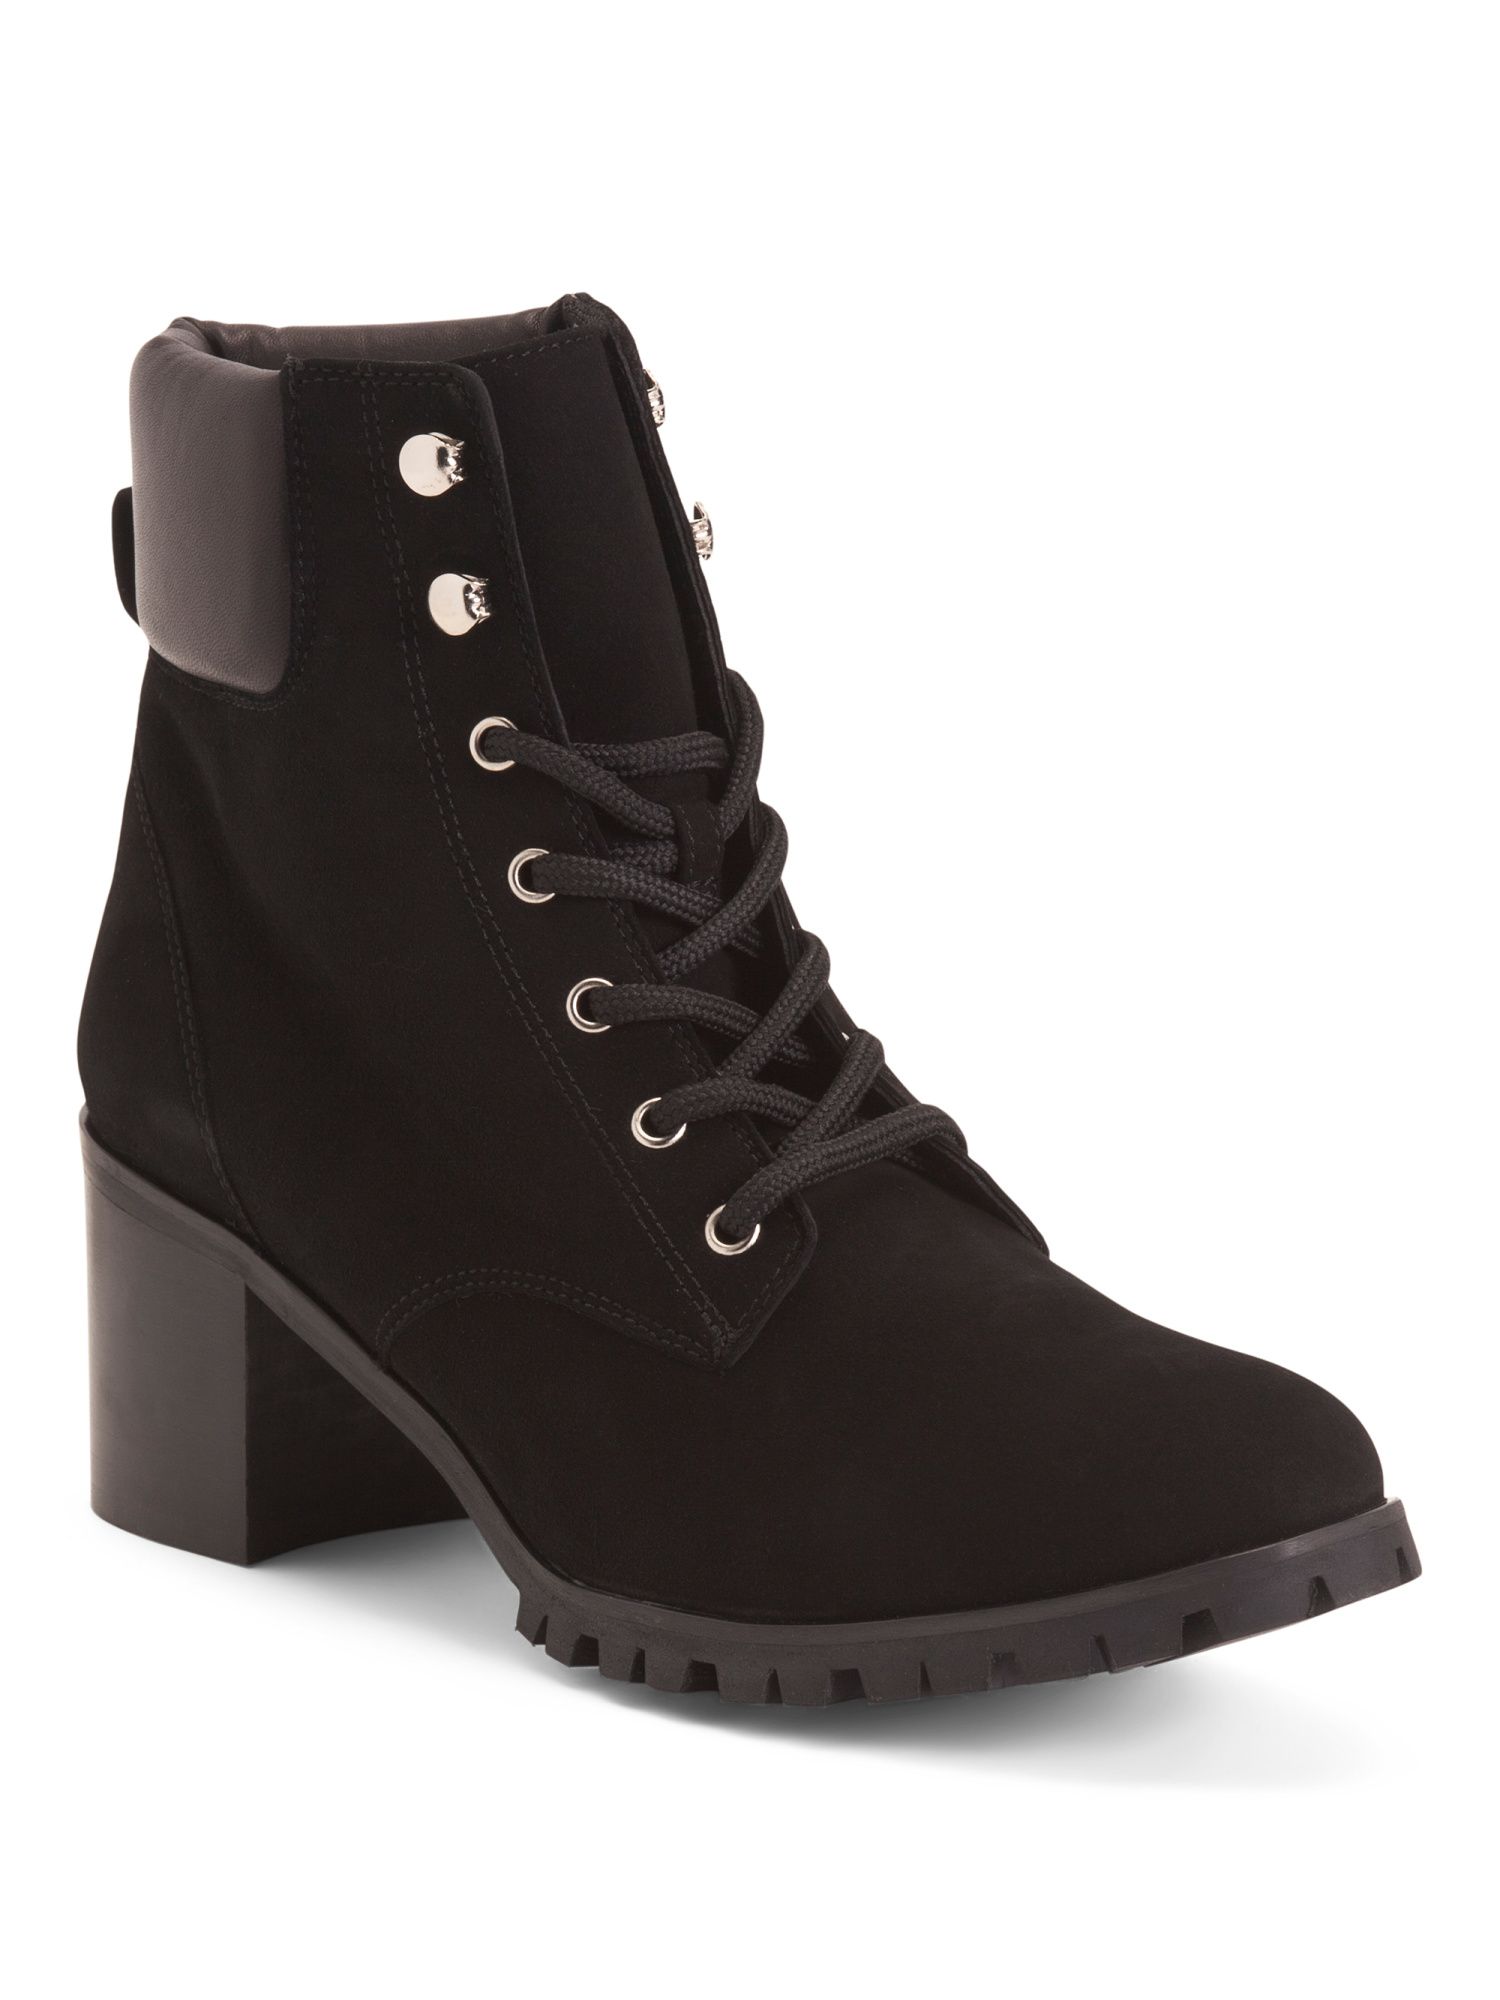 Made In Italy Leather Block Heel Laced Up Booties | TJ Maxx